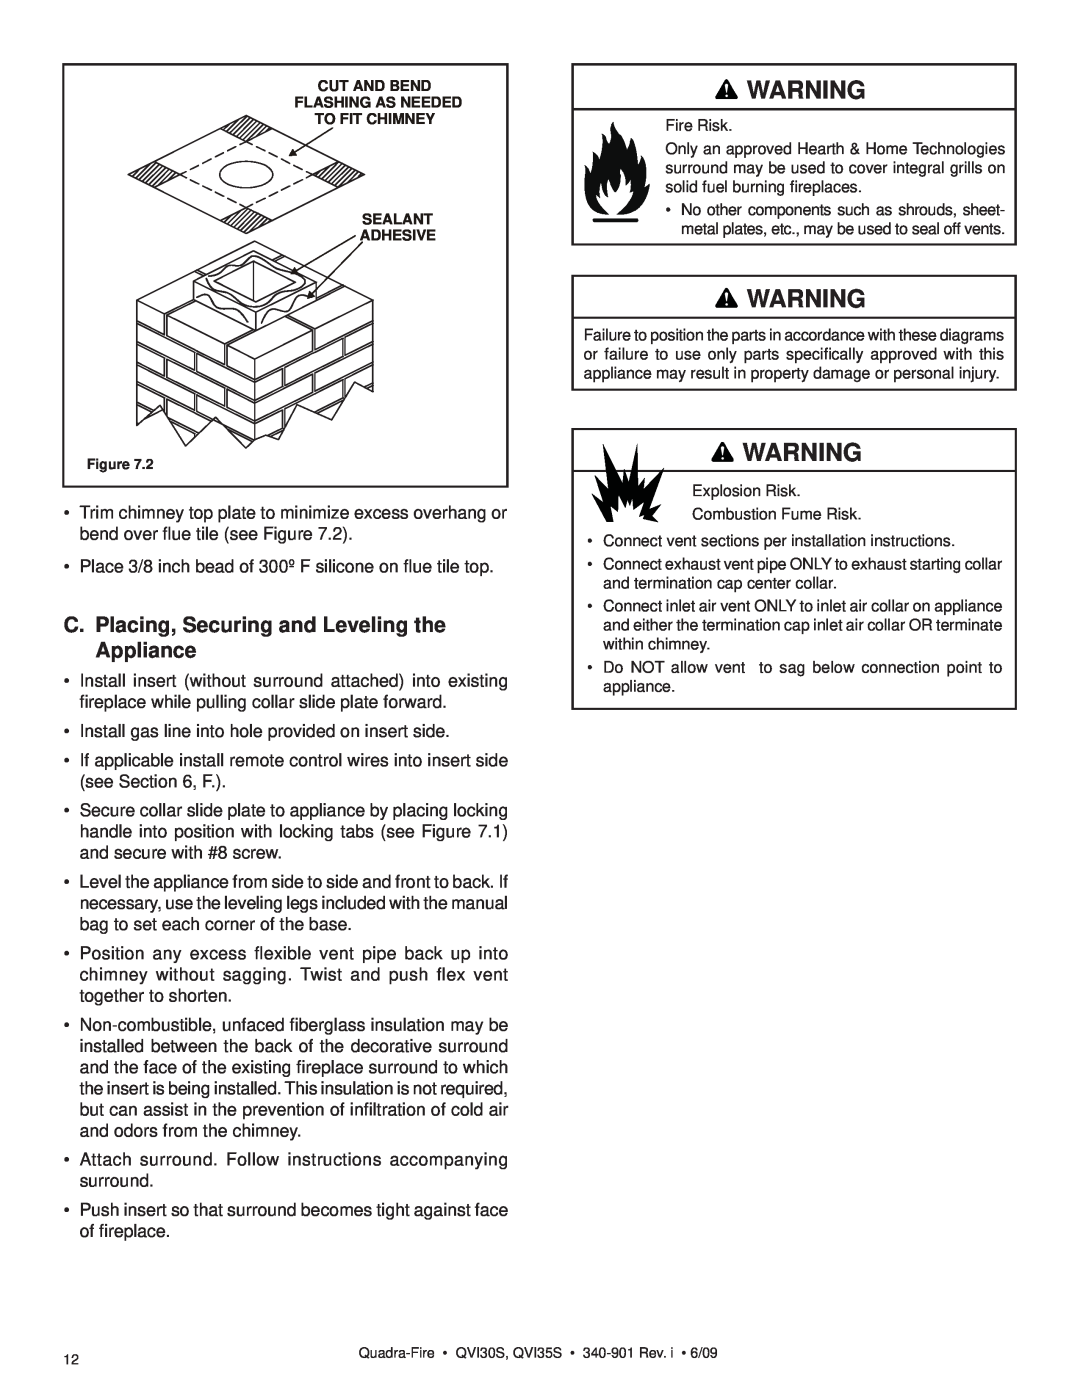 Quadra-Fire QVI35S, QVI30S owner manual C.Placing, Securing and Leveling the Appliance 